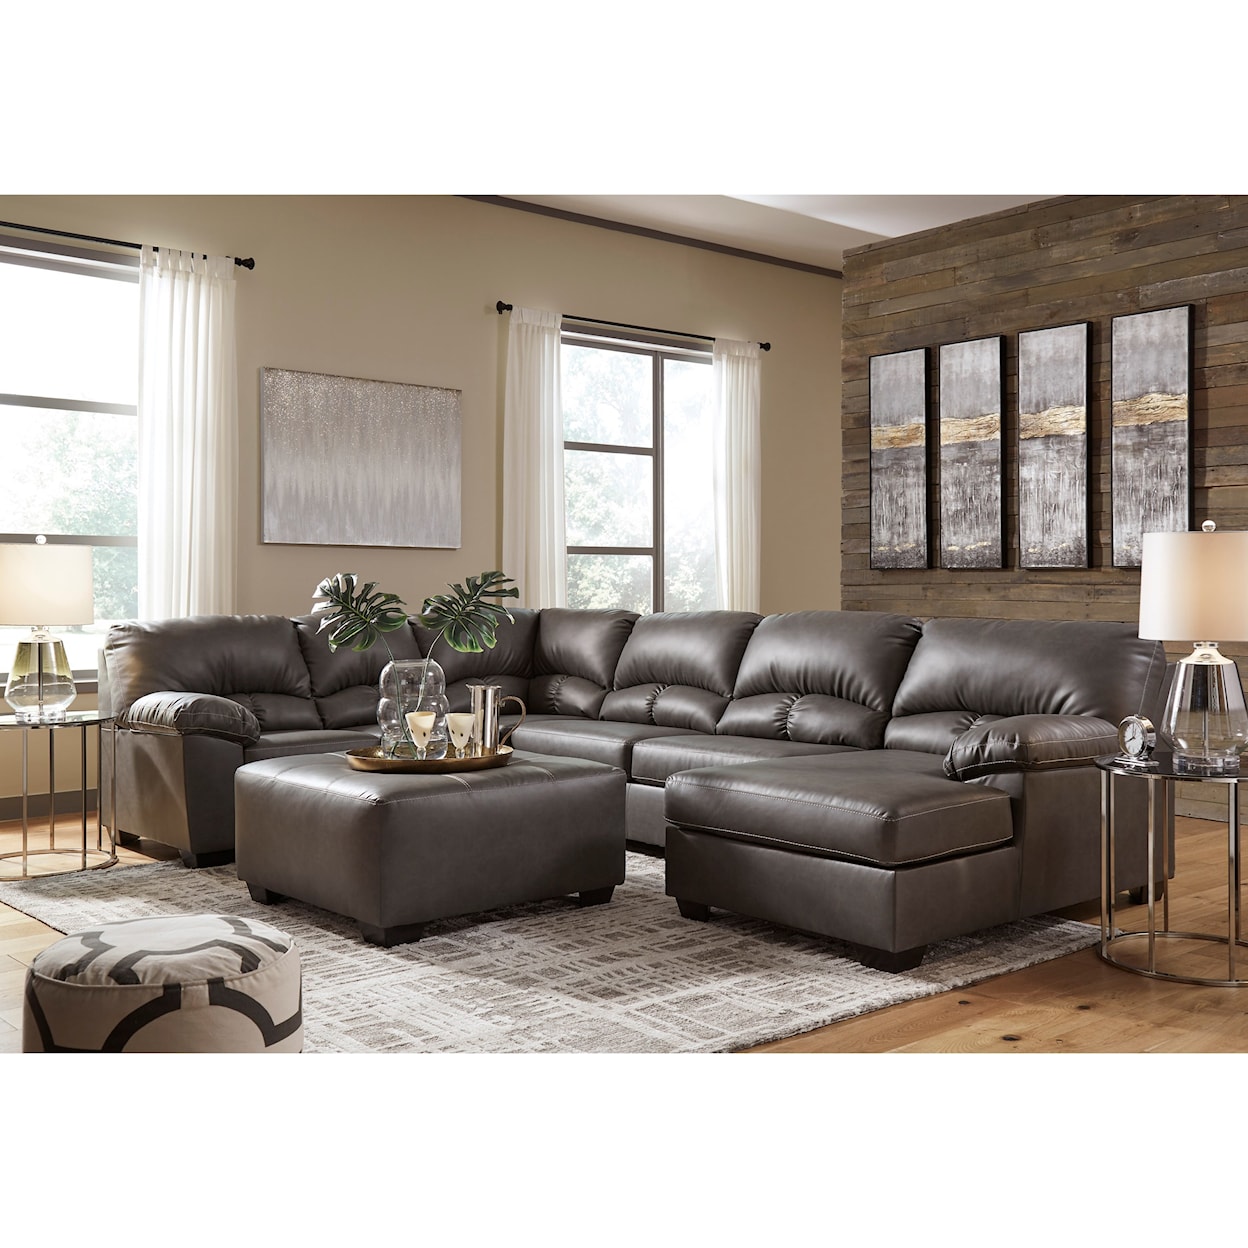 Ashley Furniture Benchcraft Aberton 3-Piece Sectional with Chaise